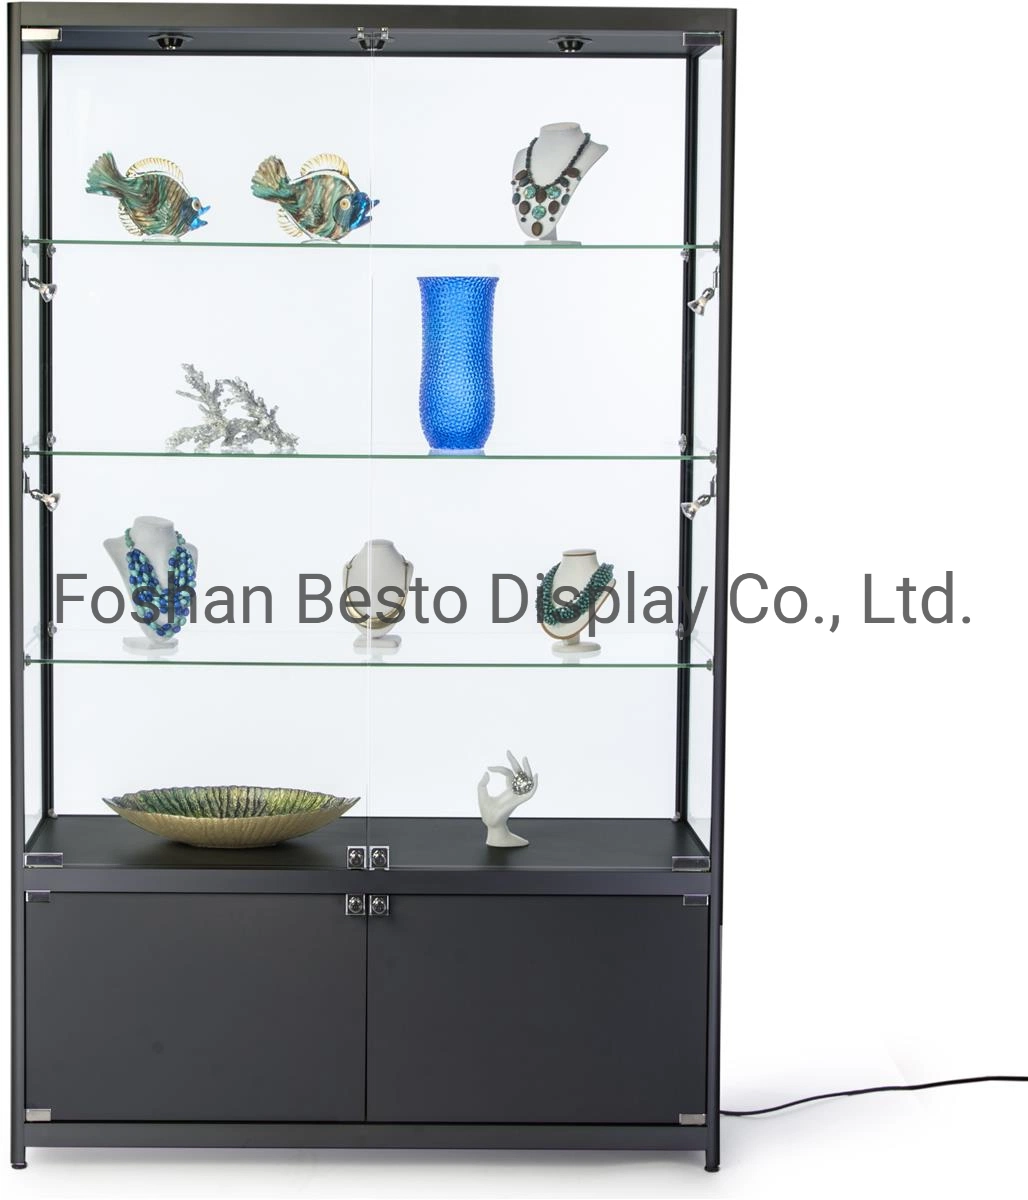 Us Wholesale/Supplier Glass Display Cabinets with LED Lights and Storage for Vape Store, Smoke Shop, Cigarette Store, Jewelry Display, Museum, Exhibition